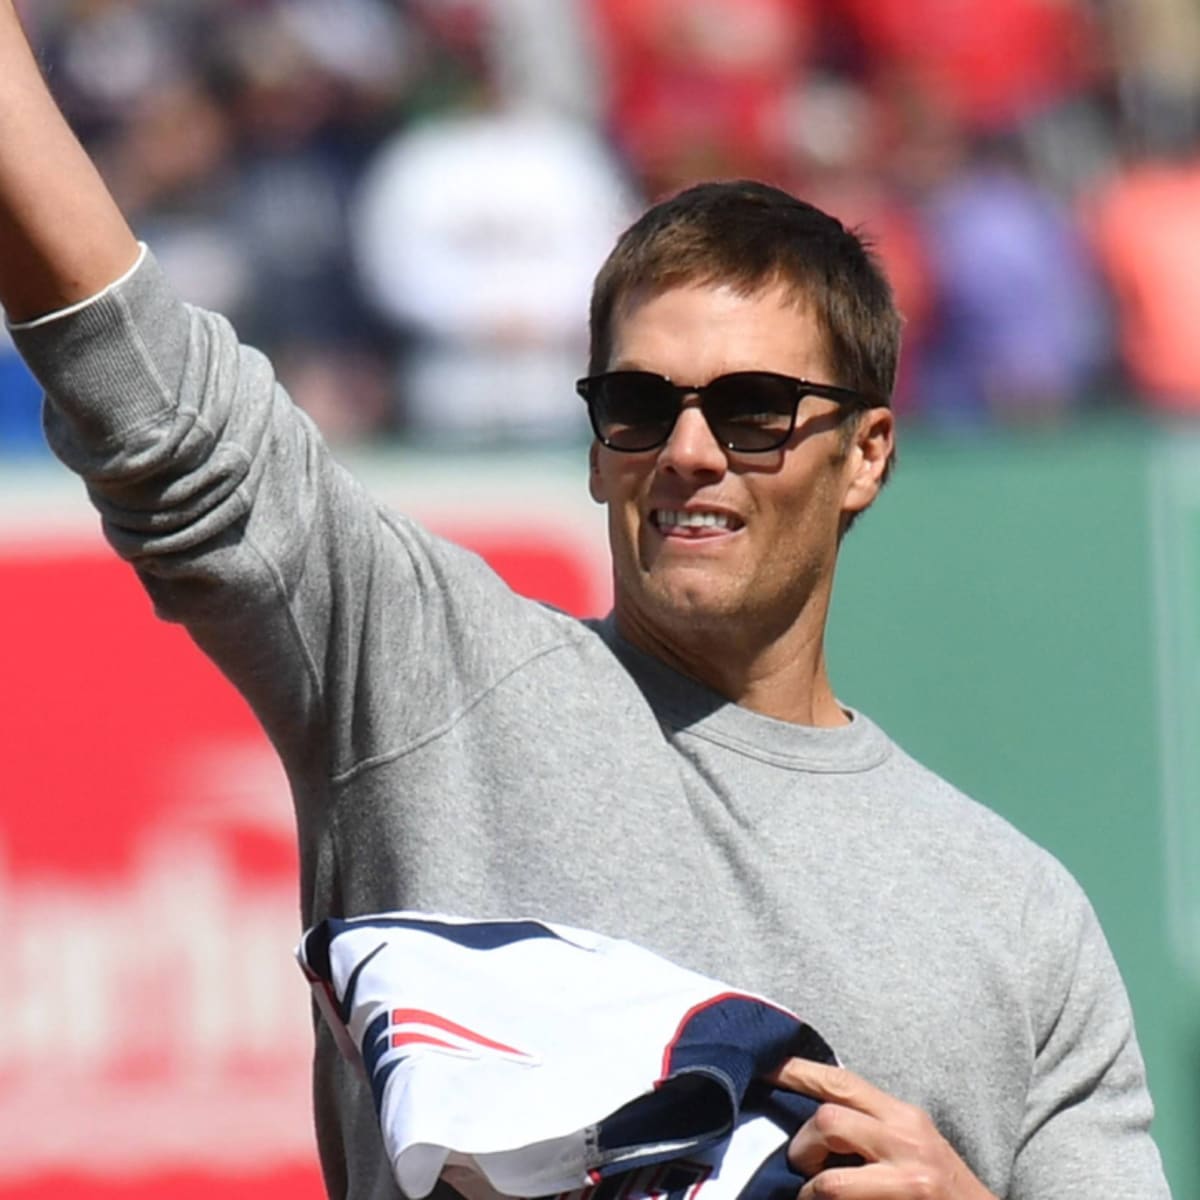 Tom Brady was once complimented by former Expos GM on his baseball